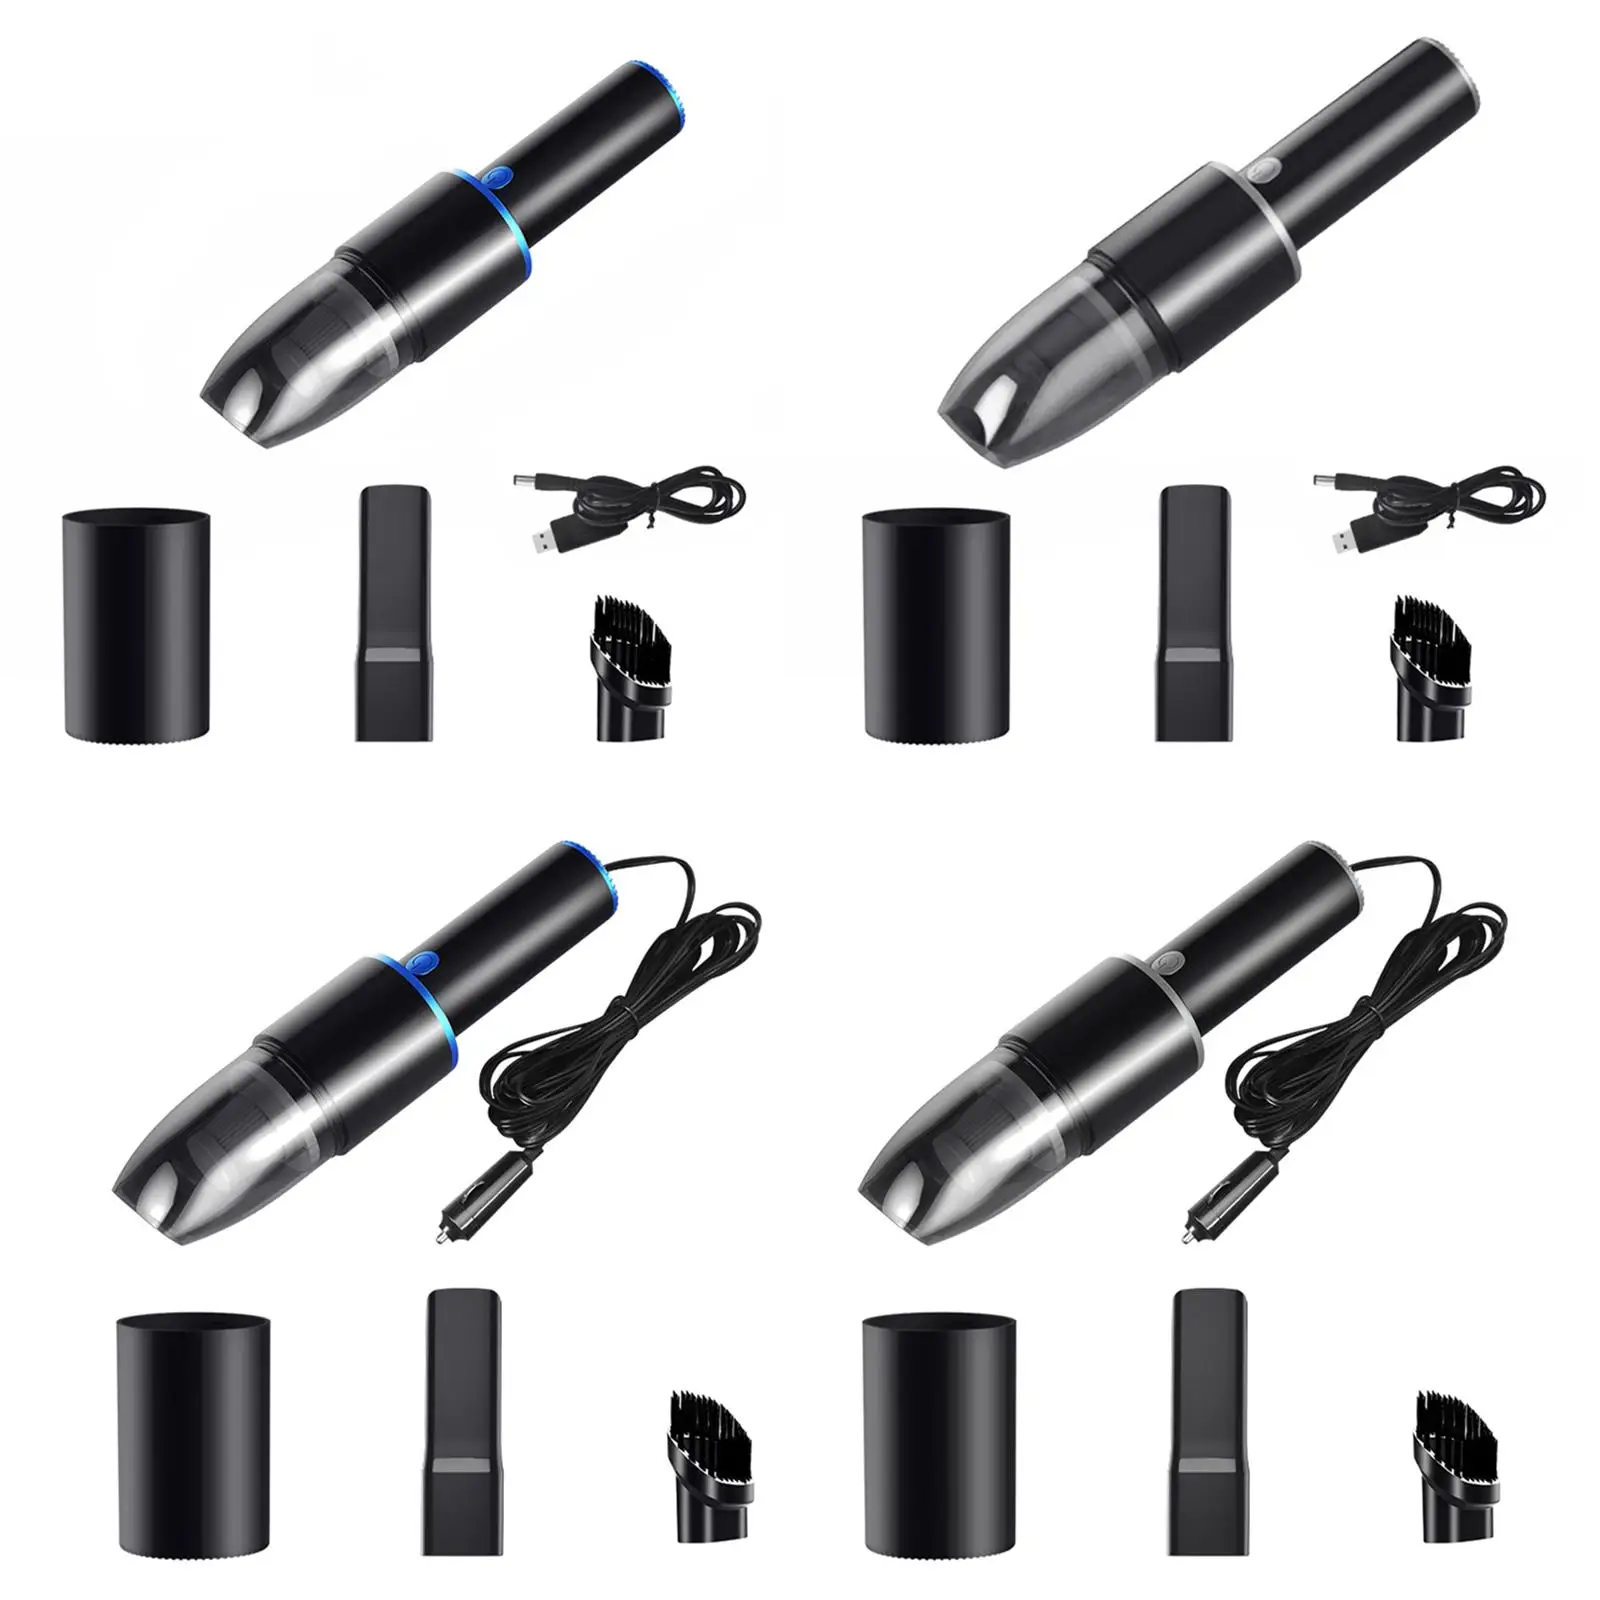 Portable Car Vacuum Cleaner Small Pet Hair USB Rechargeable/